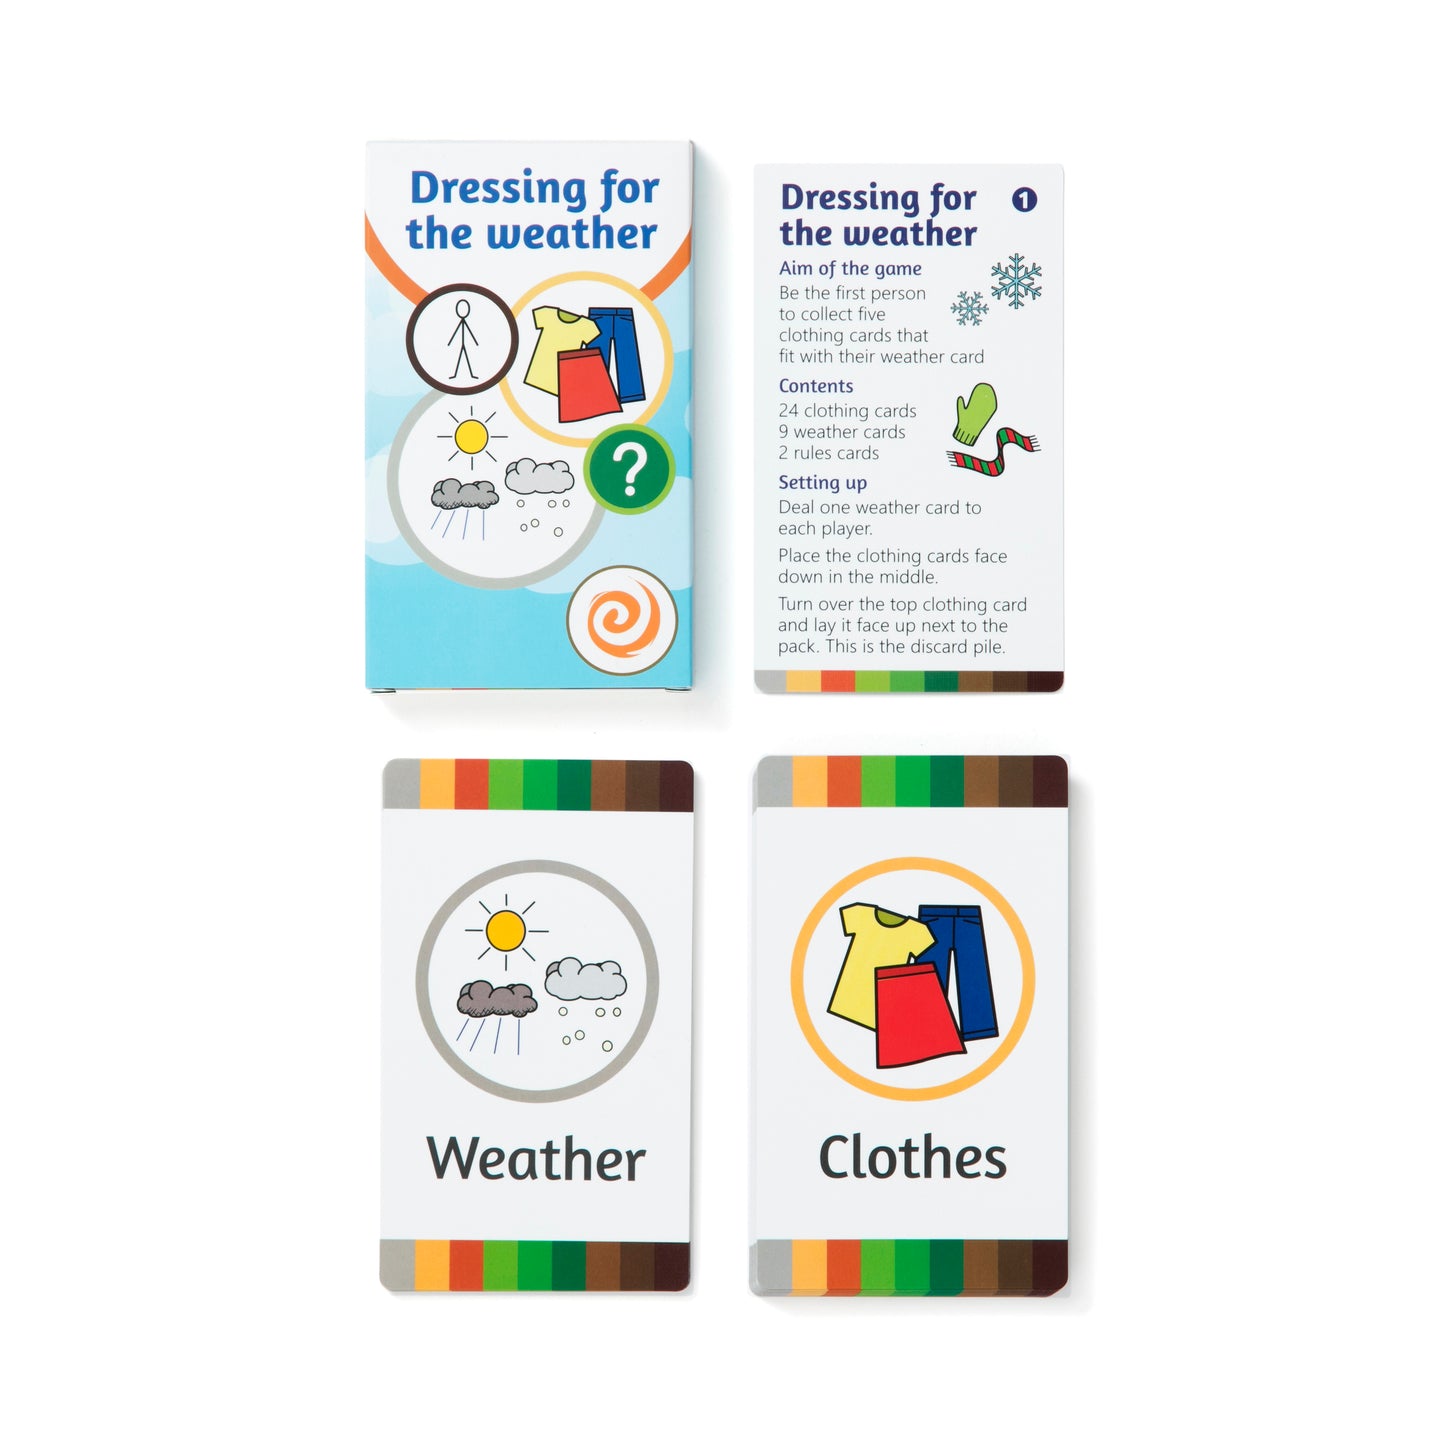 Dressing for the weather rules card and two other cards face up